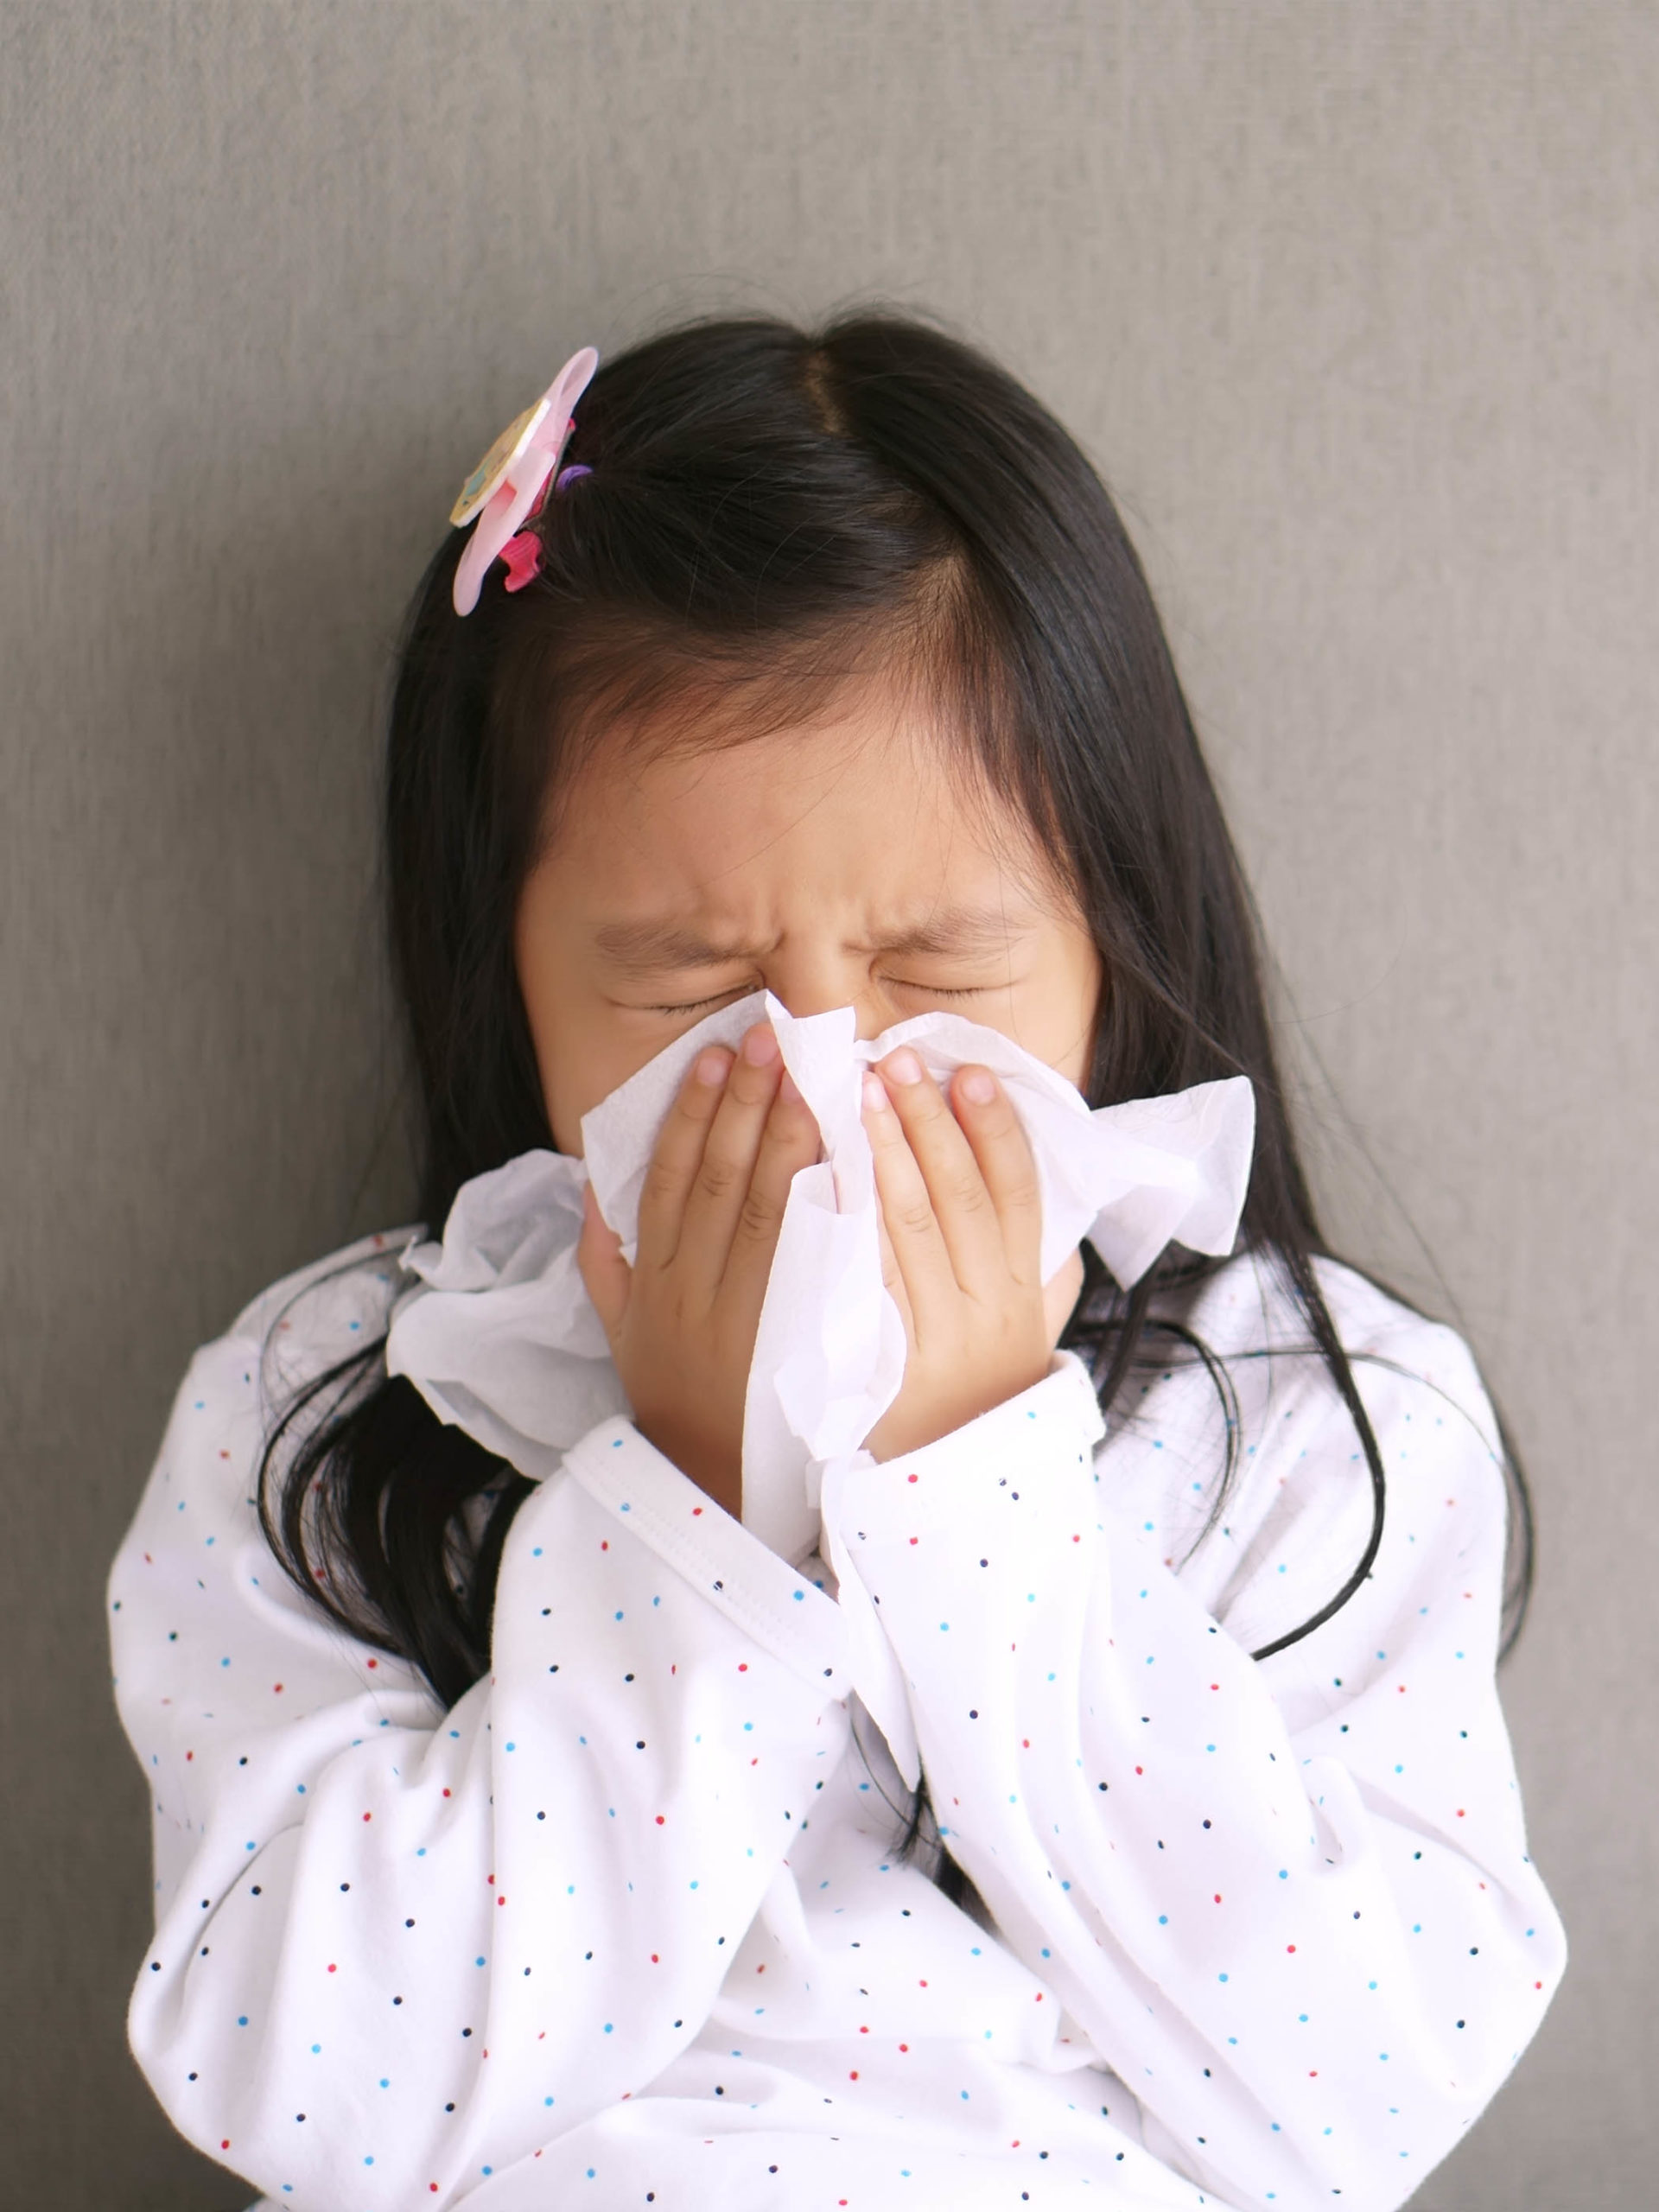 sick young girl blows her nose in a tissue